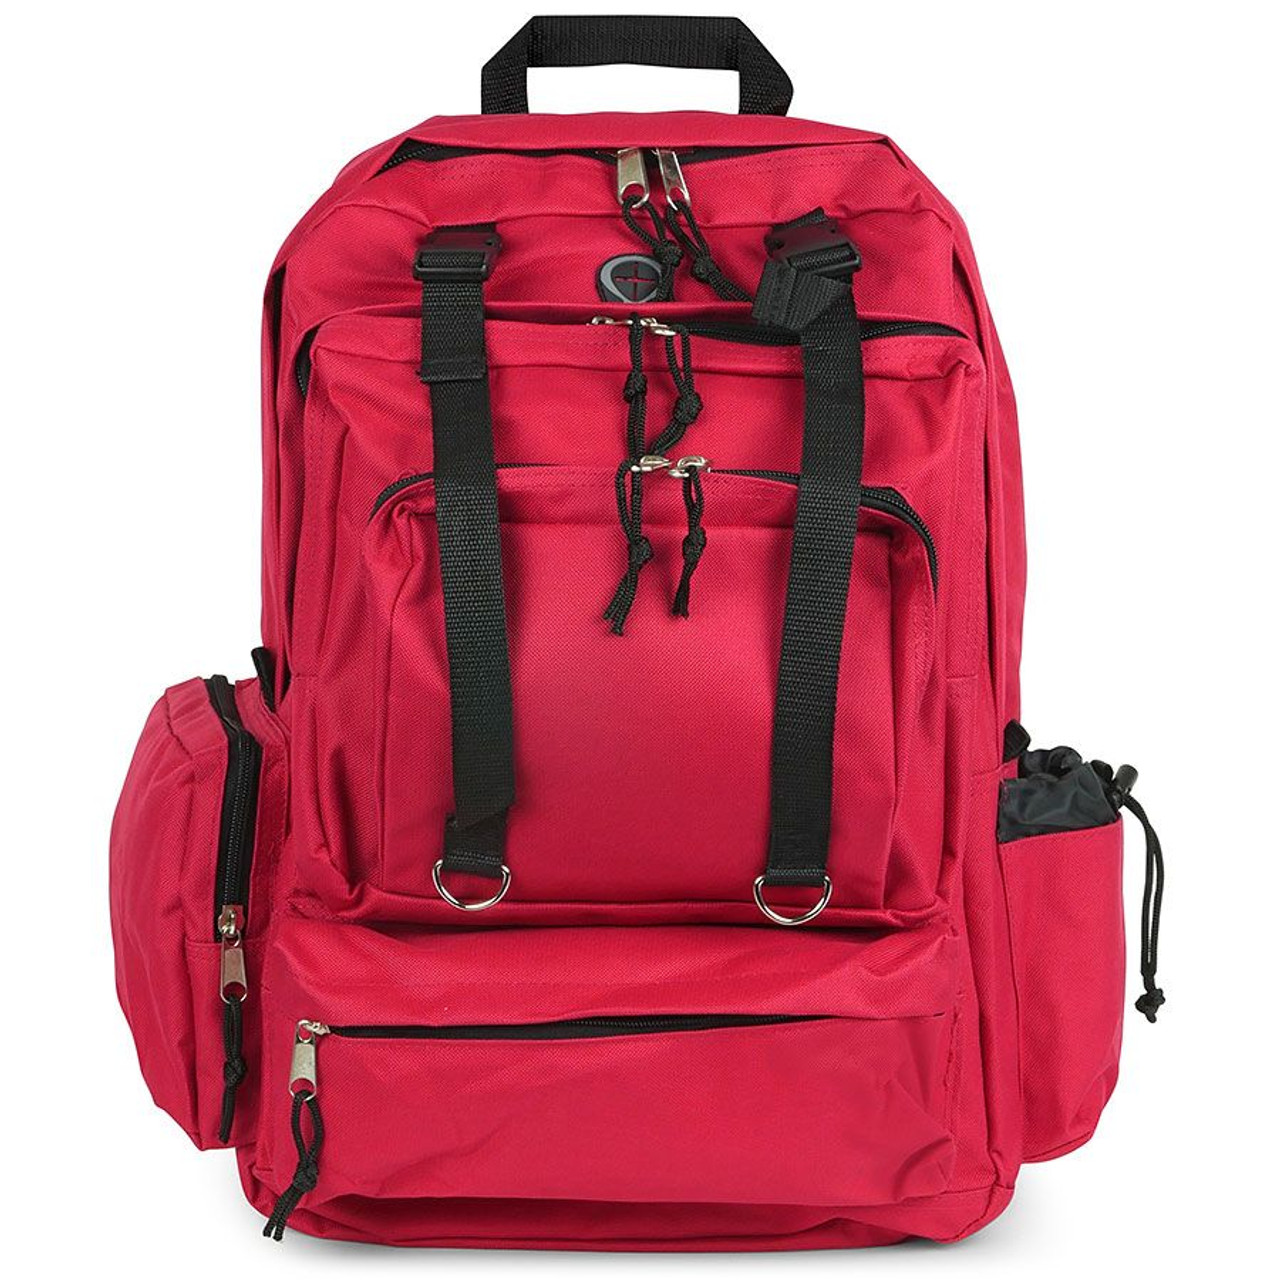 Deluxe Reponder Red Backpack - Emergency Survival Medical Response - Gear  Bag - Nylon - EMT Bags, Backpacks and First Aid Kit Containers